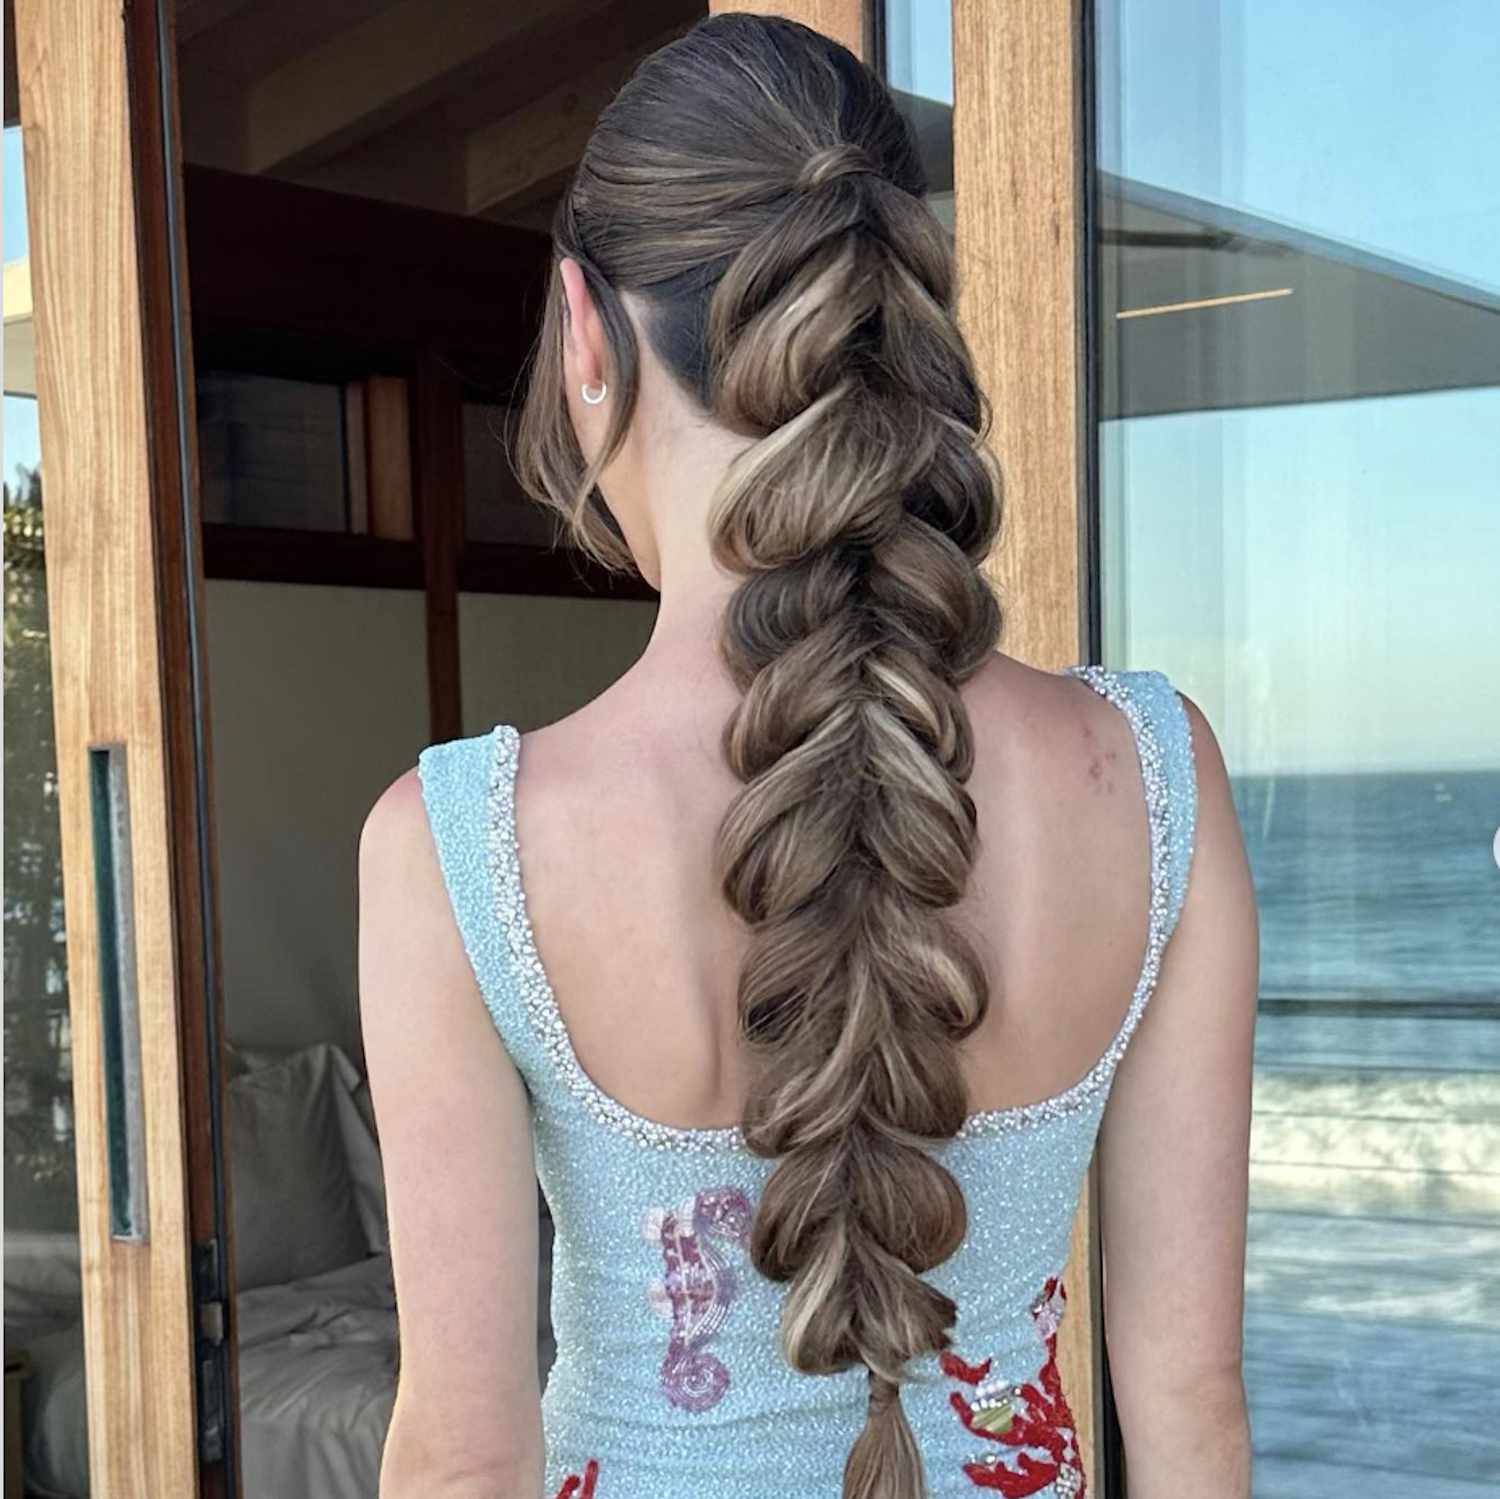 Back view of woman with voluminous, long, puffy braid hairstyle